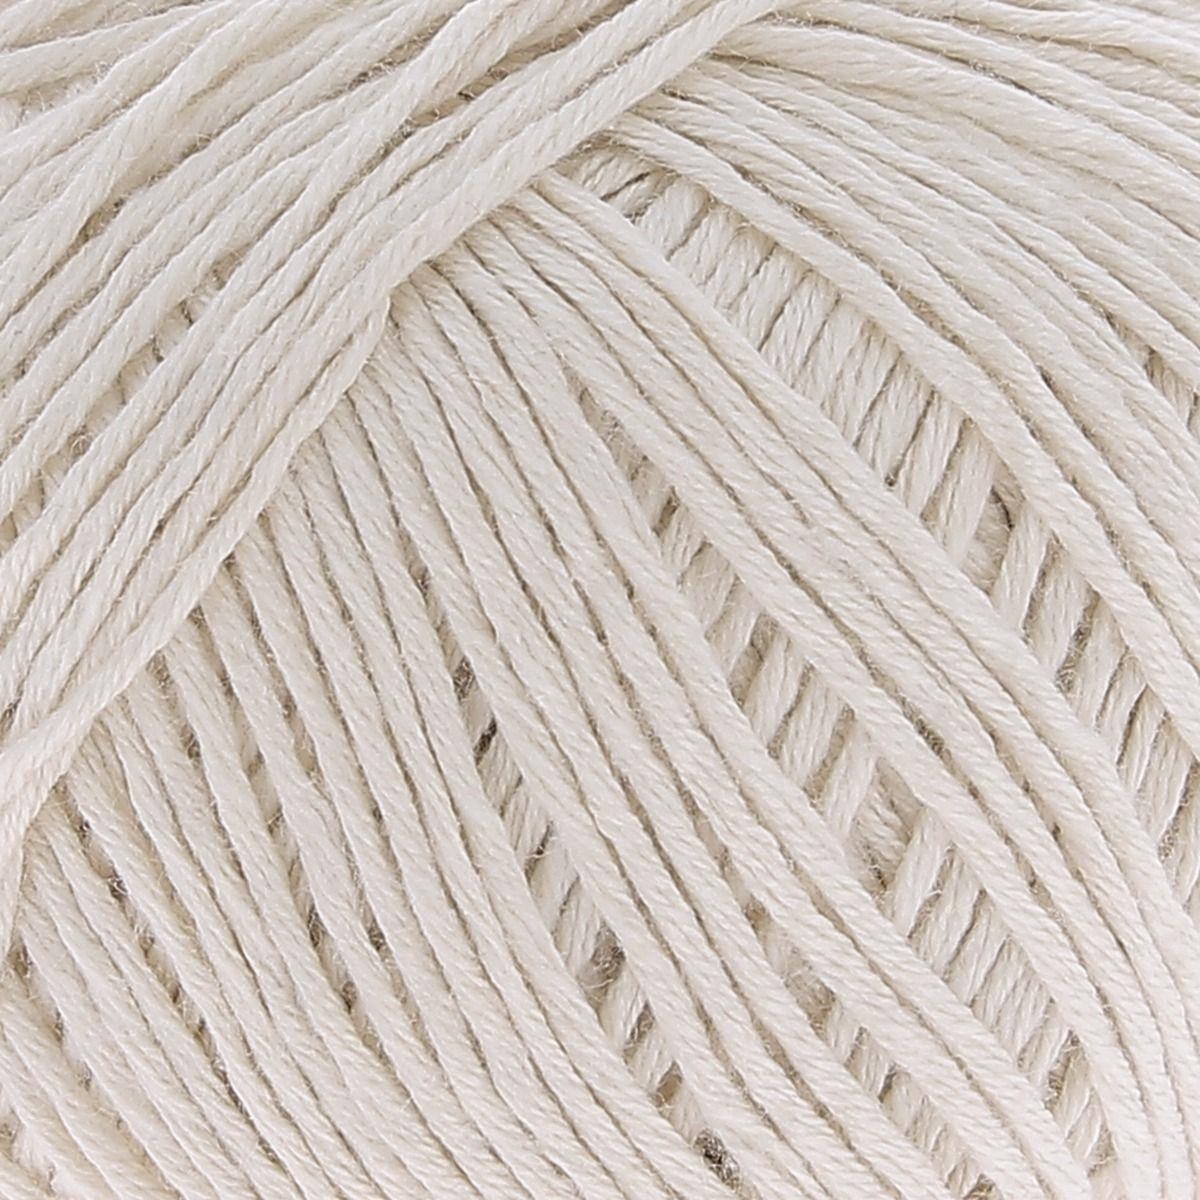 [Hoooked] Atlantica Sand White Seacell Cotton Yarn - 120M, 50g